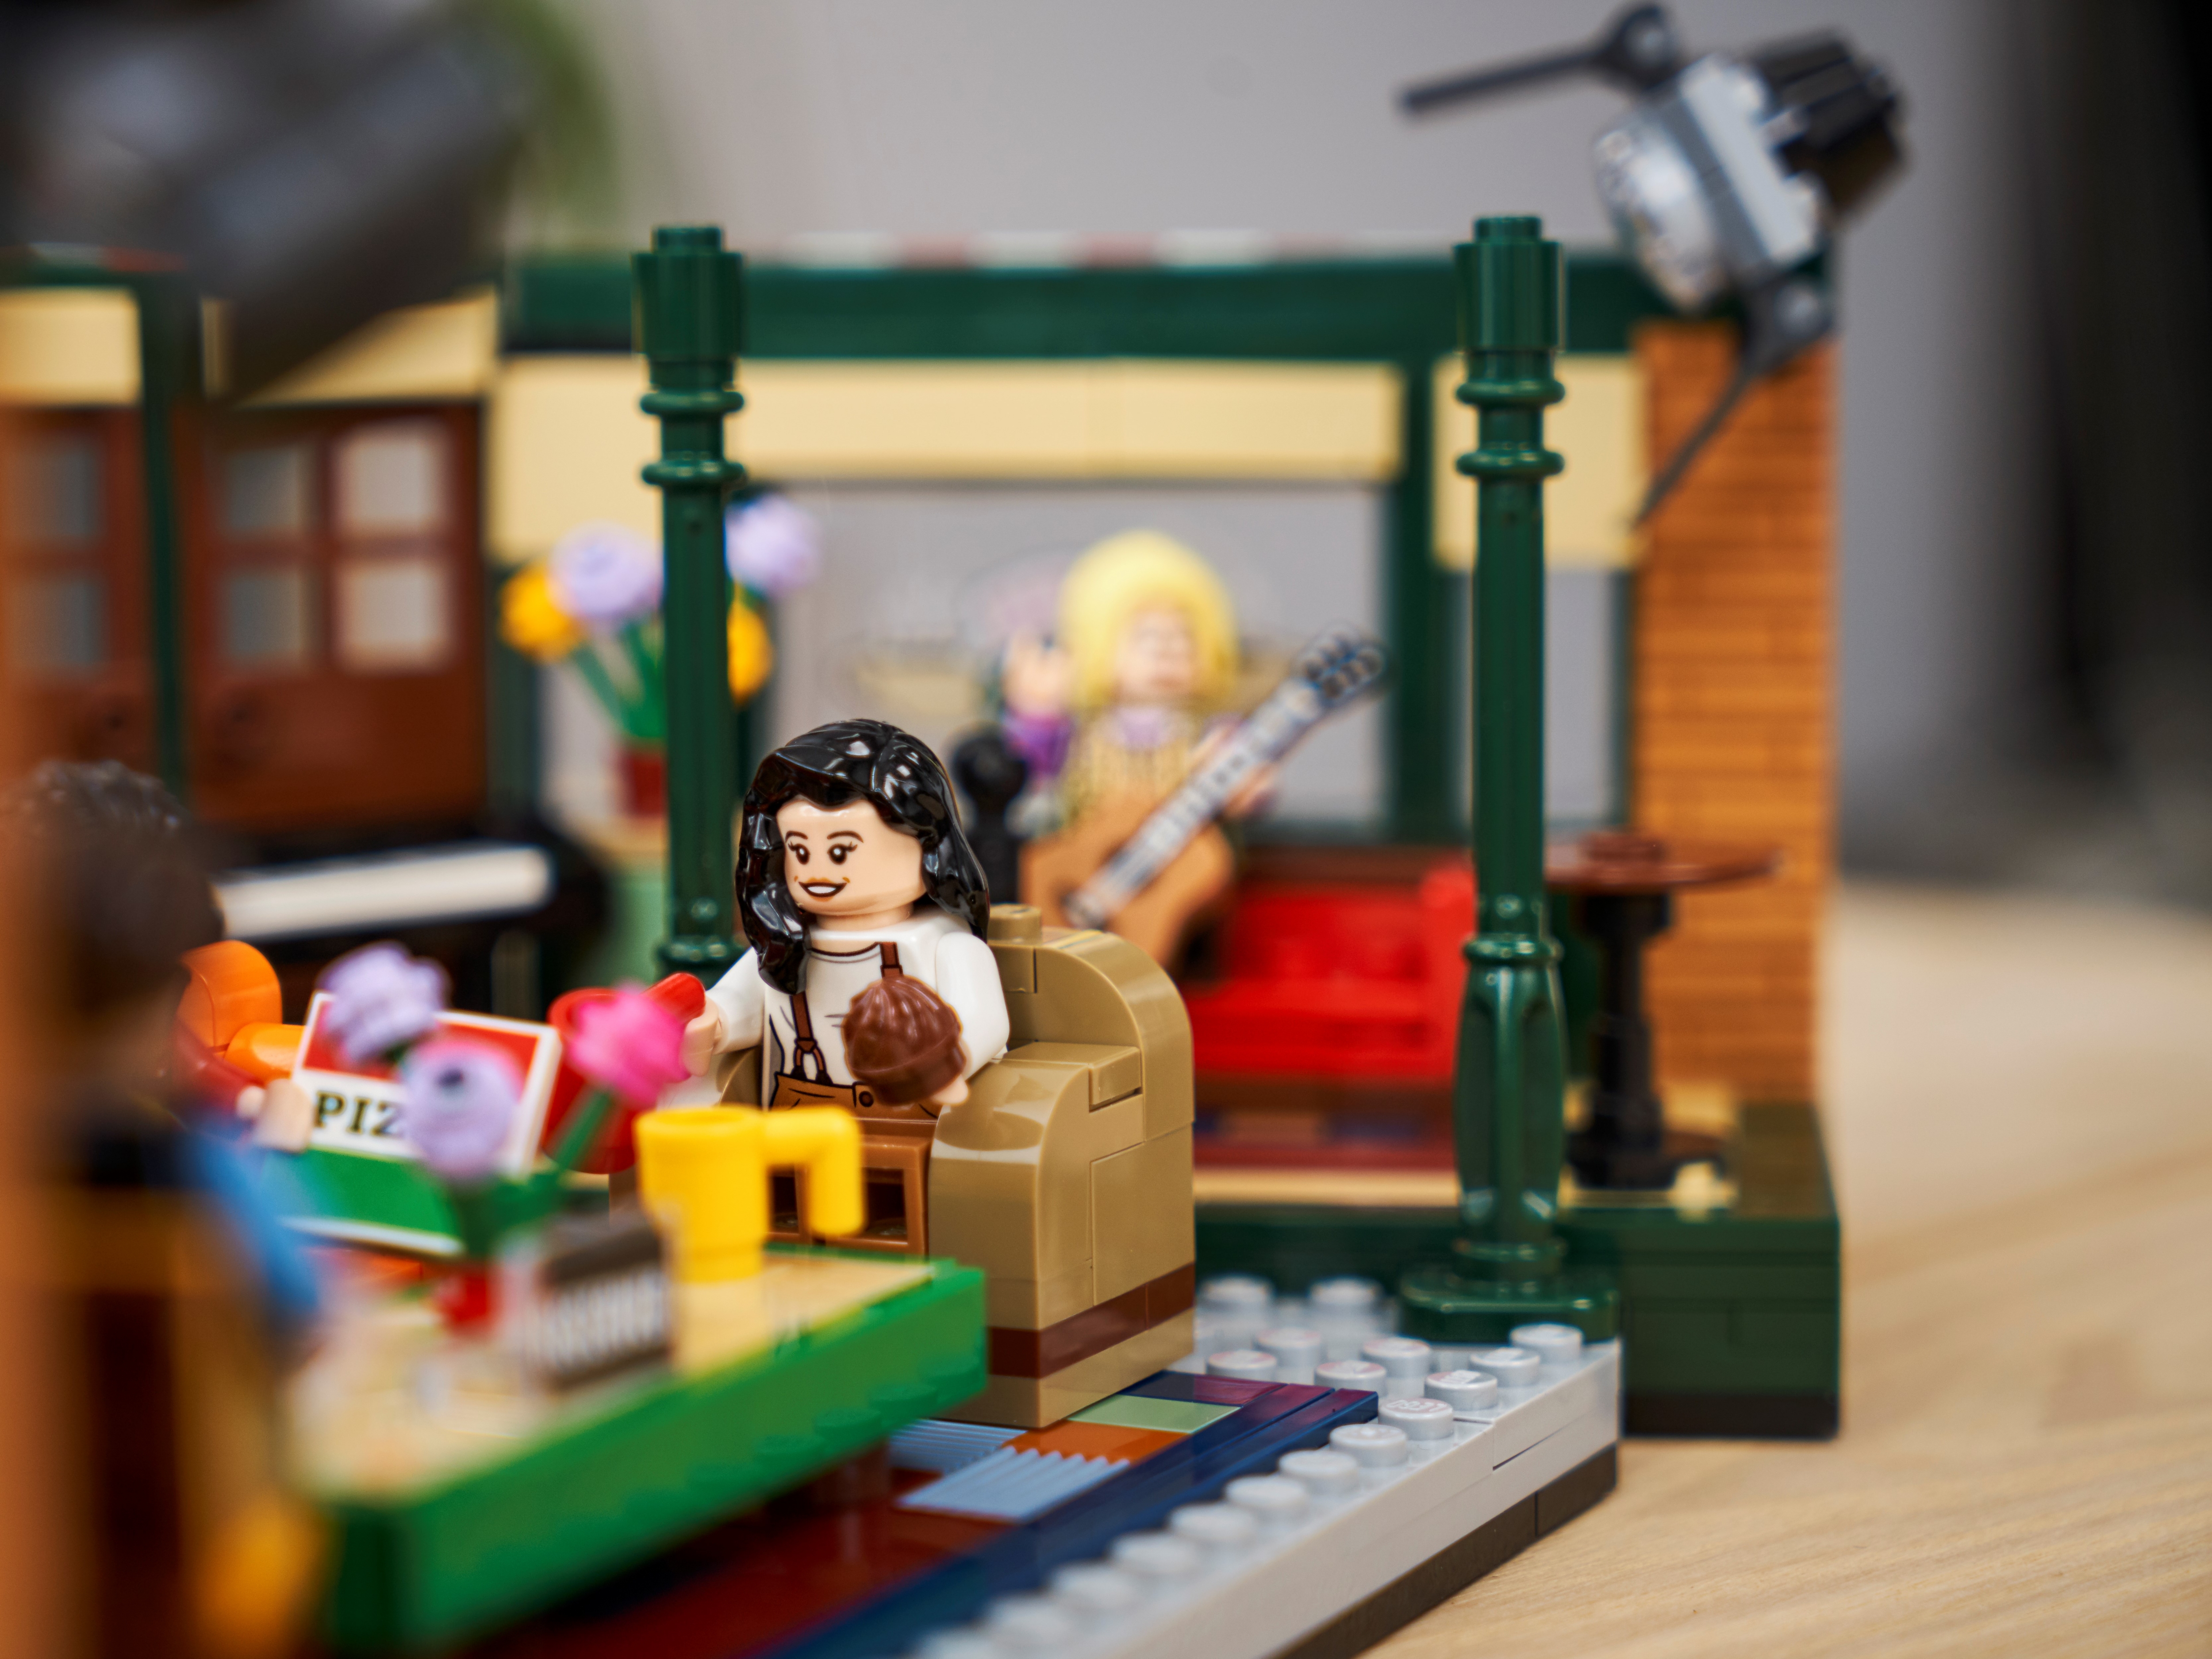 PIVOT! Brand-New 'Friends' LEGO Central Perk Set Comes Out Today! - GeekDad